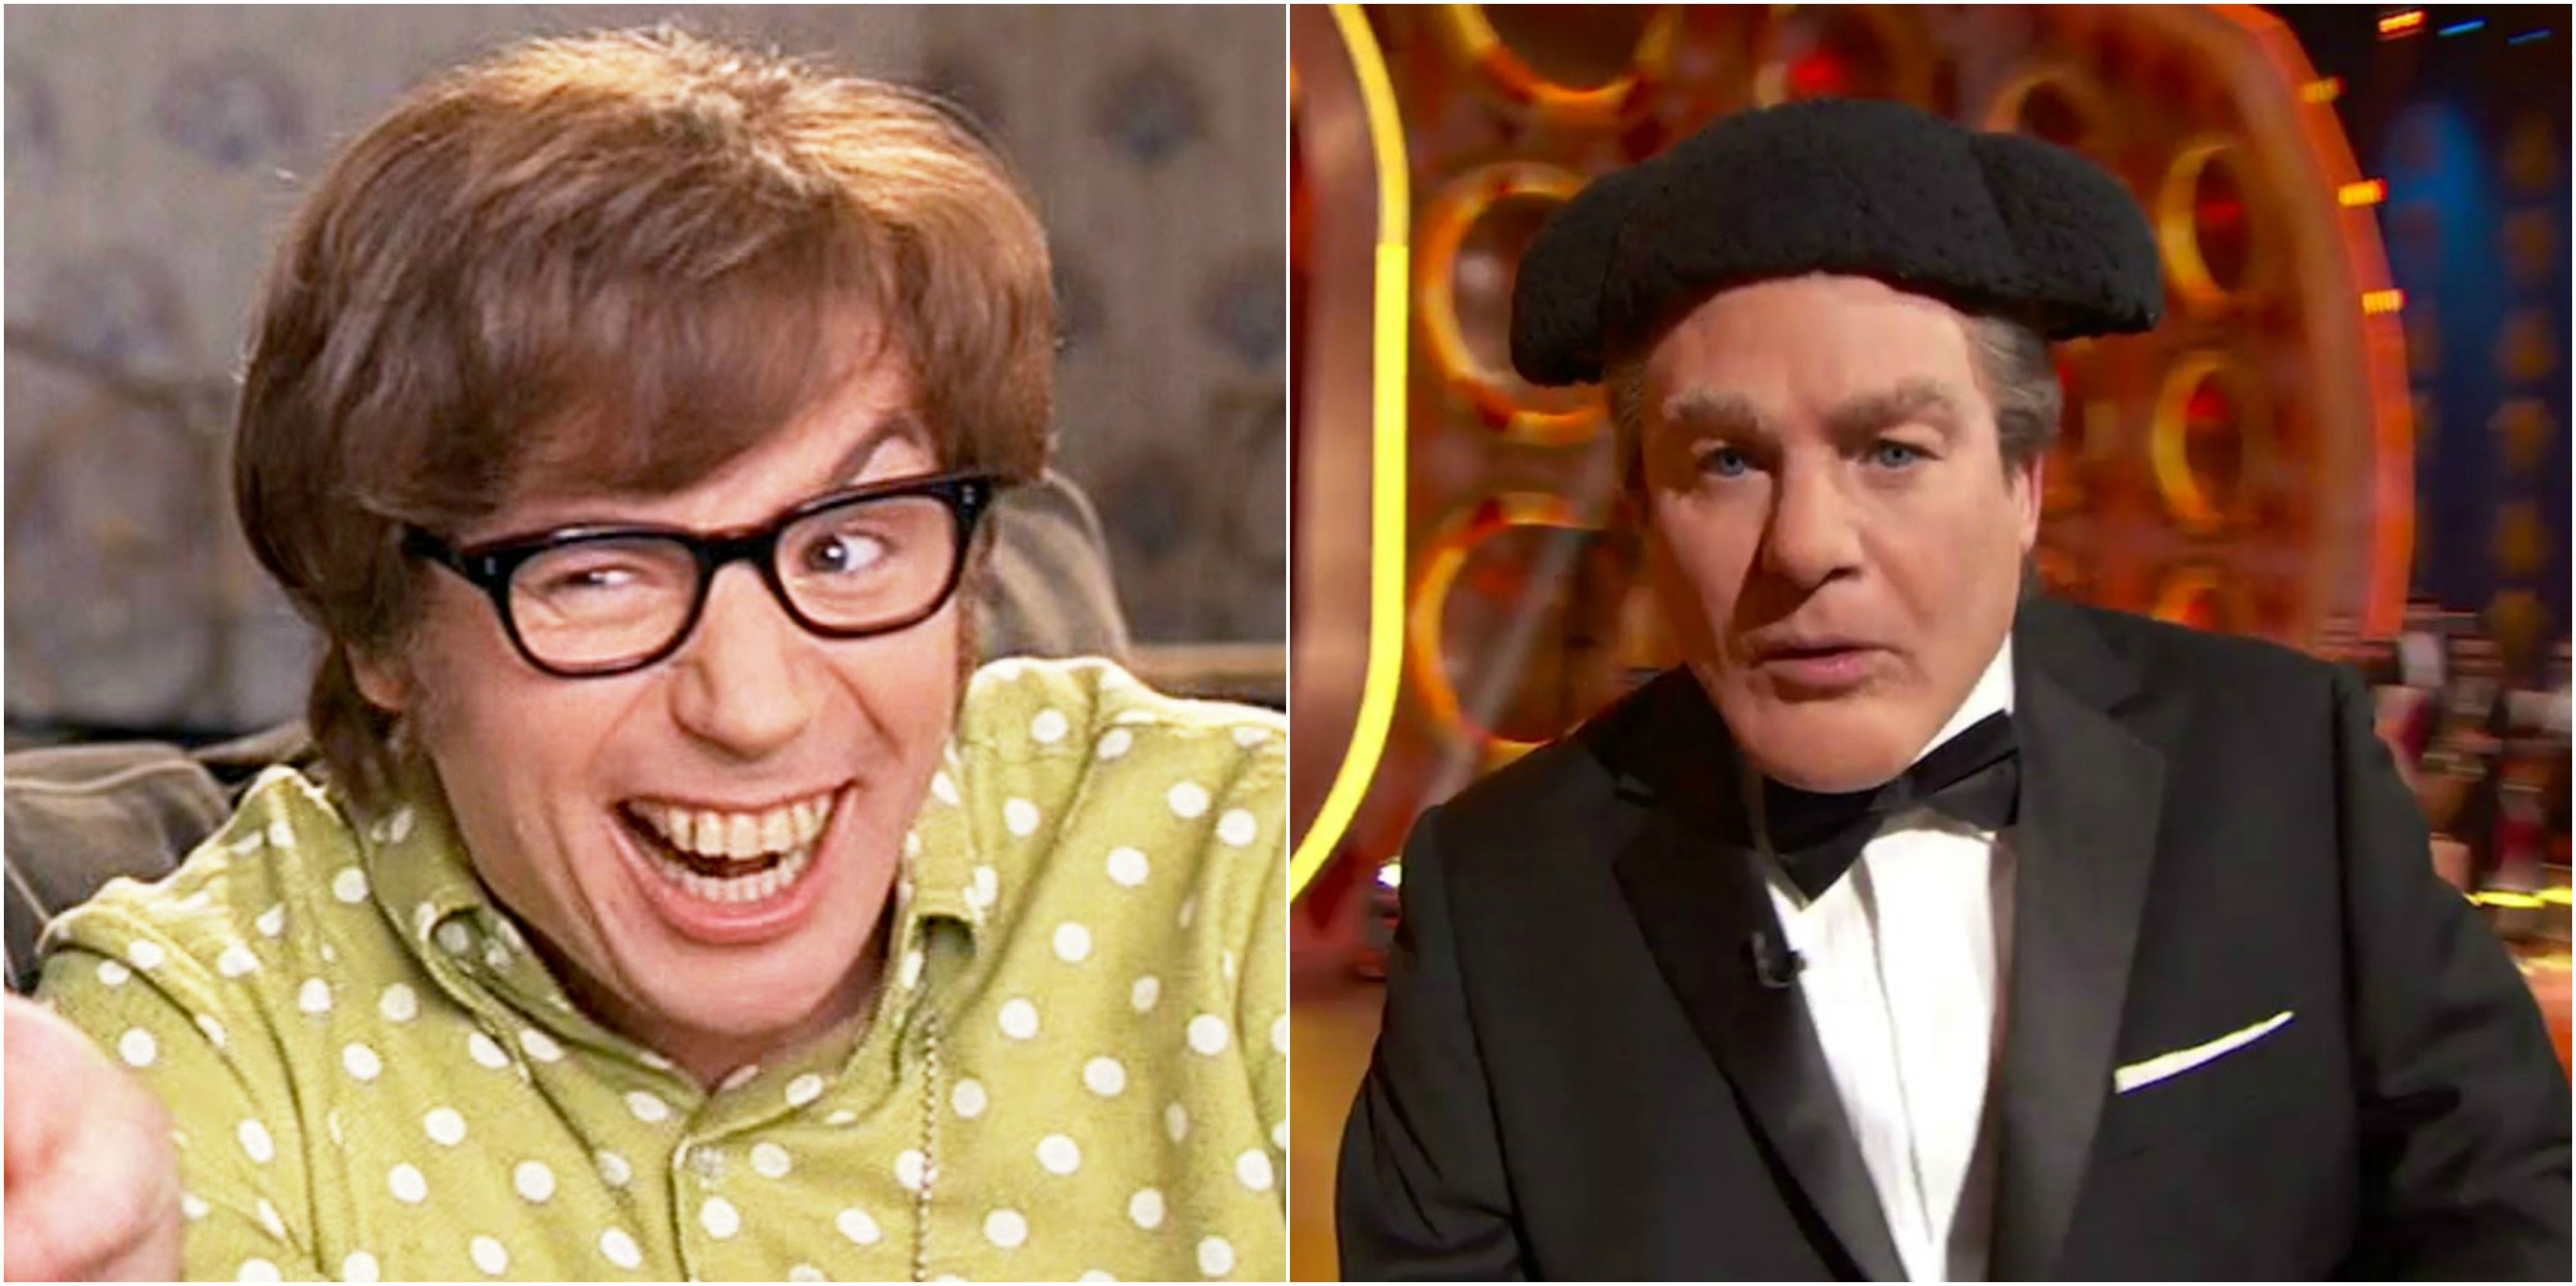 Where Are They Now Austin Powers International Man Of Mystery